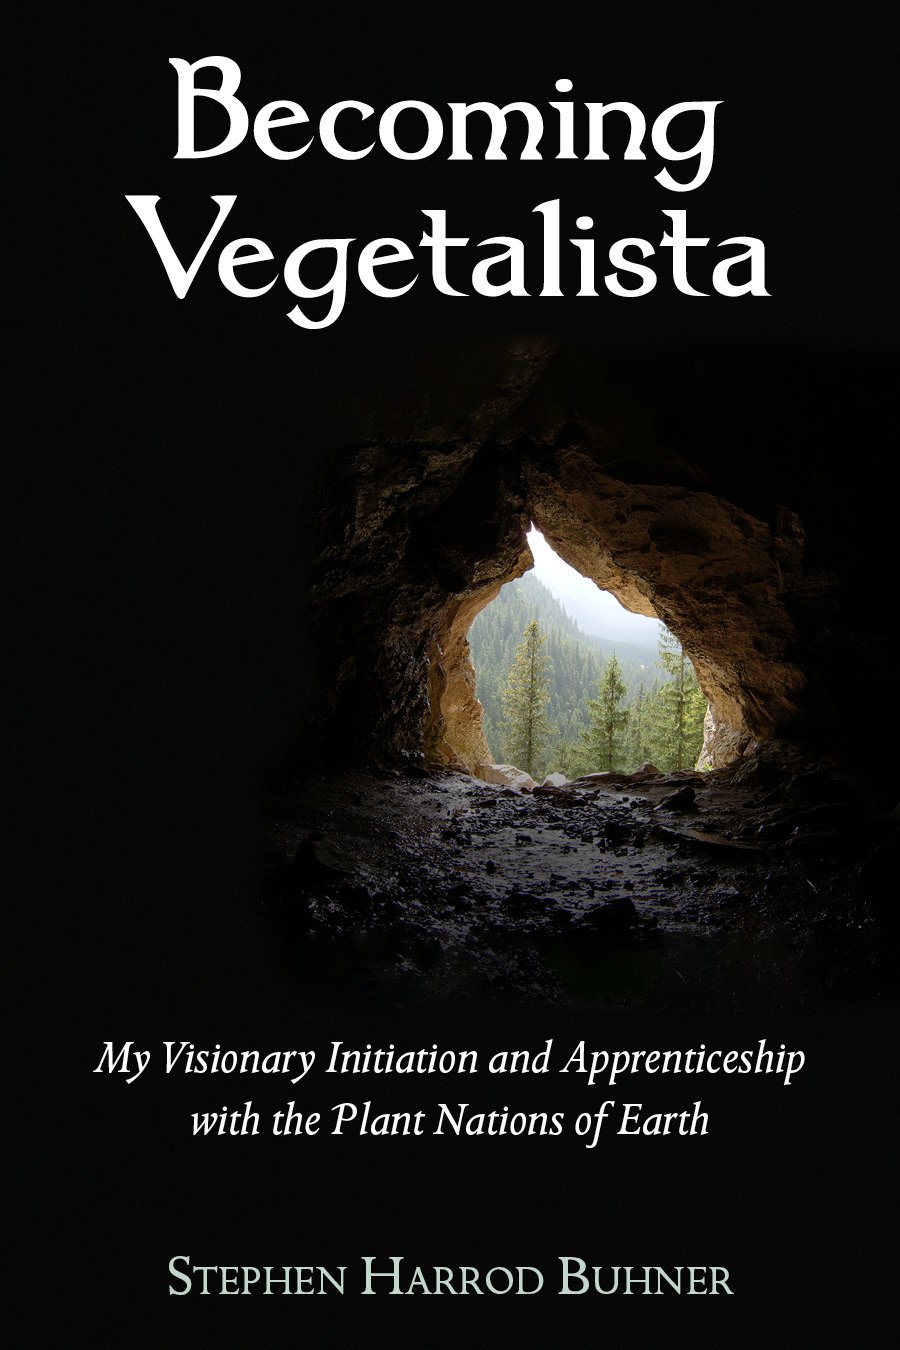 The Becoming Vegetalista cover